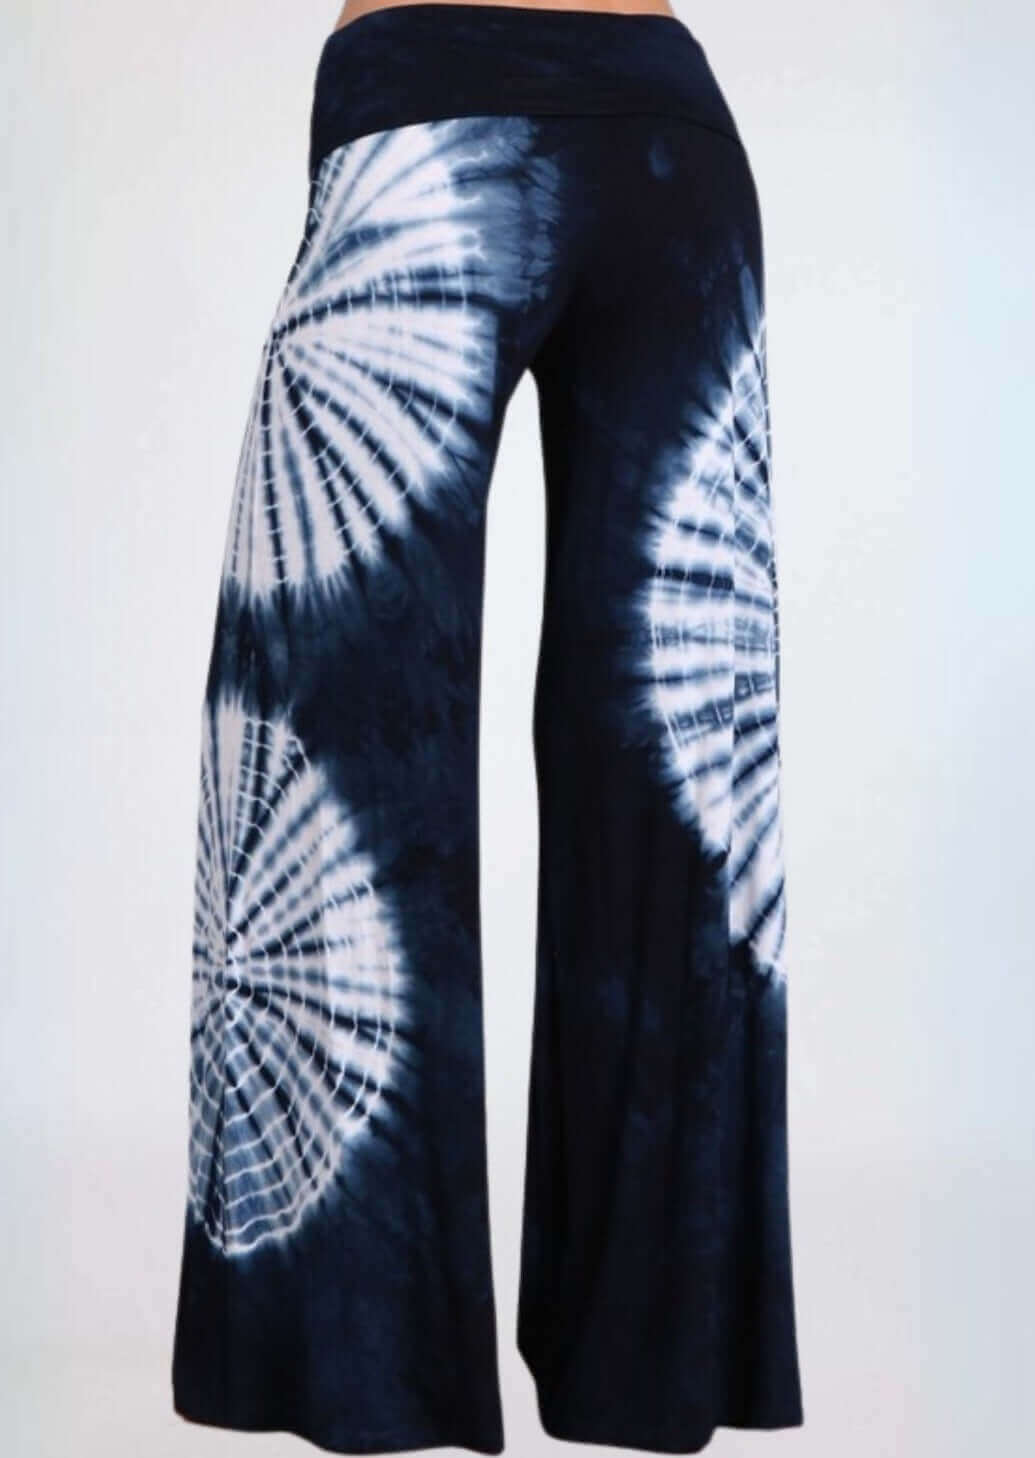 USA Made Women's Navy & White Casual Tie Dye Palazzo Pants |  Soft & comfortable design with a wide fold over waistband | Classy Cozy Cool Made in America Boutique